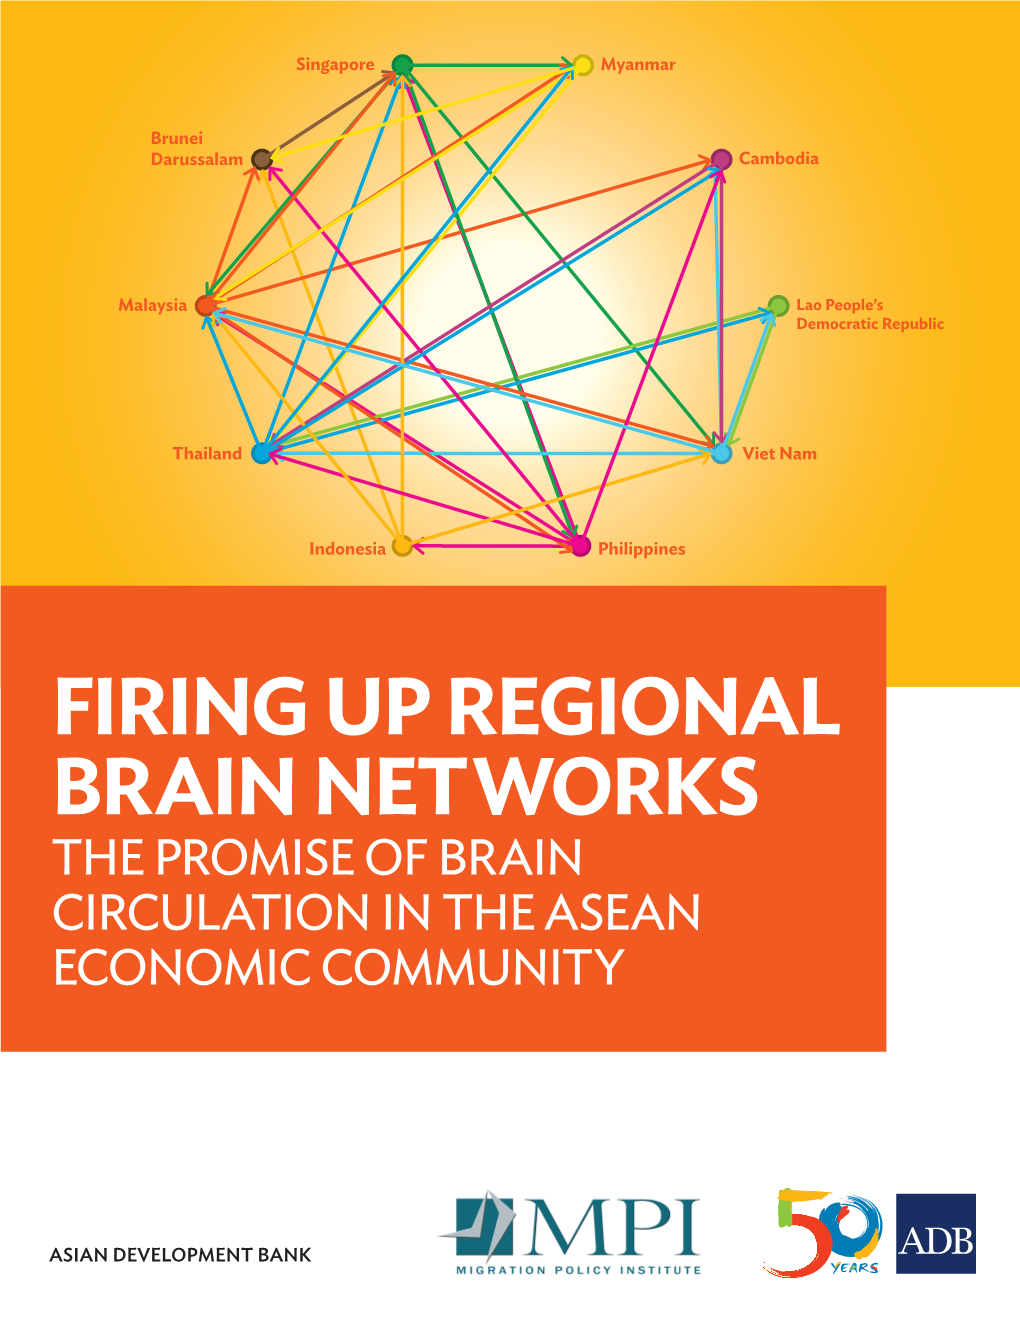 The Promise of Brain Circulation in the ASEAN Economic Community